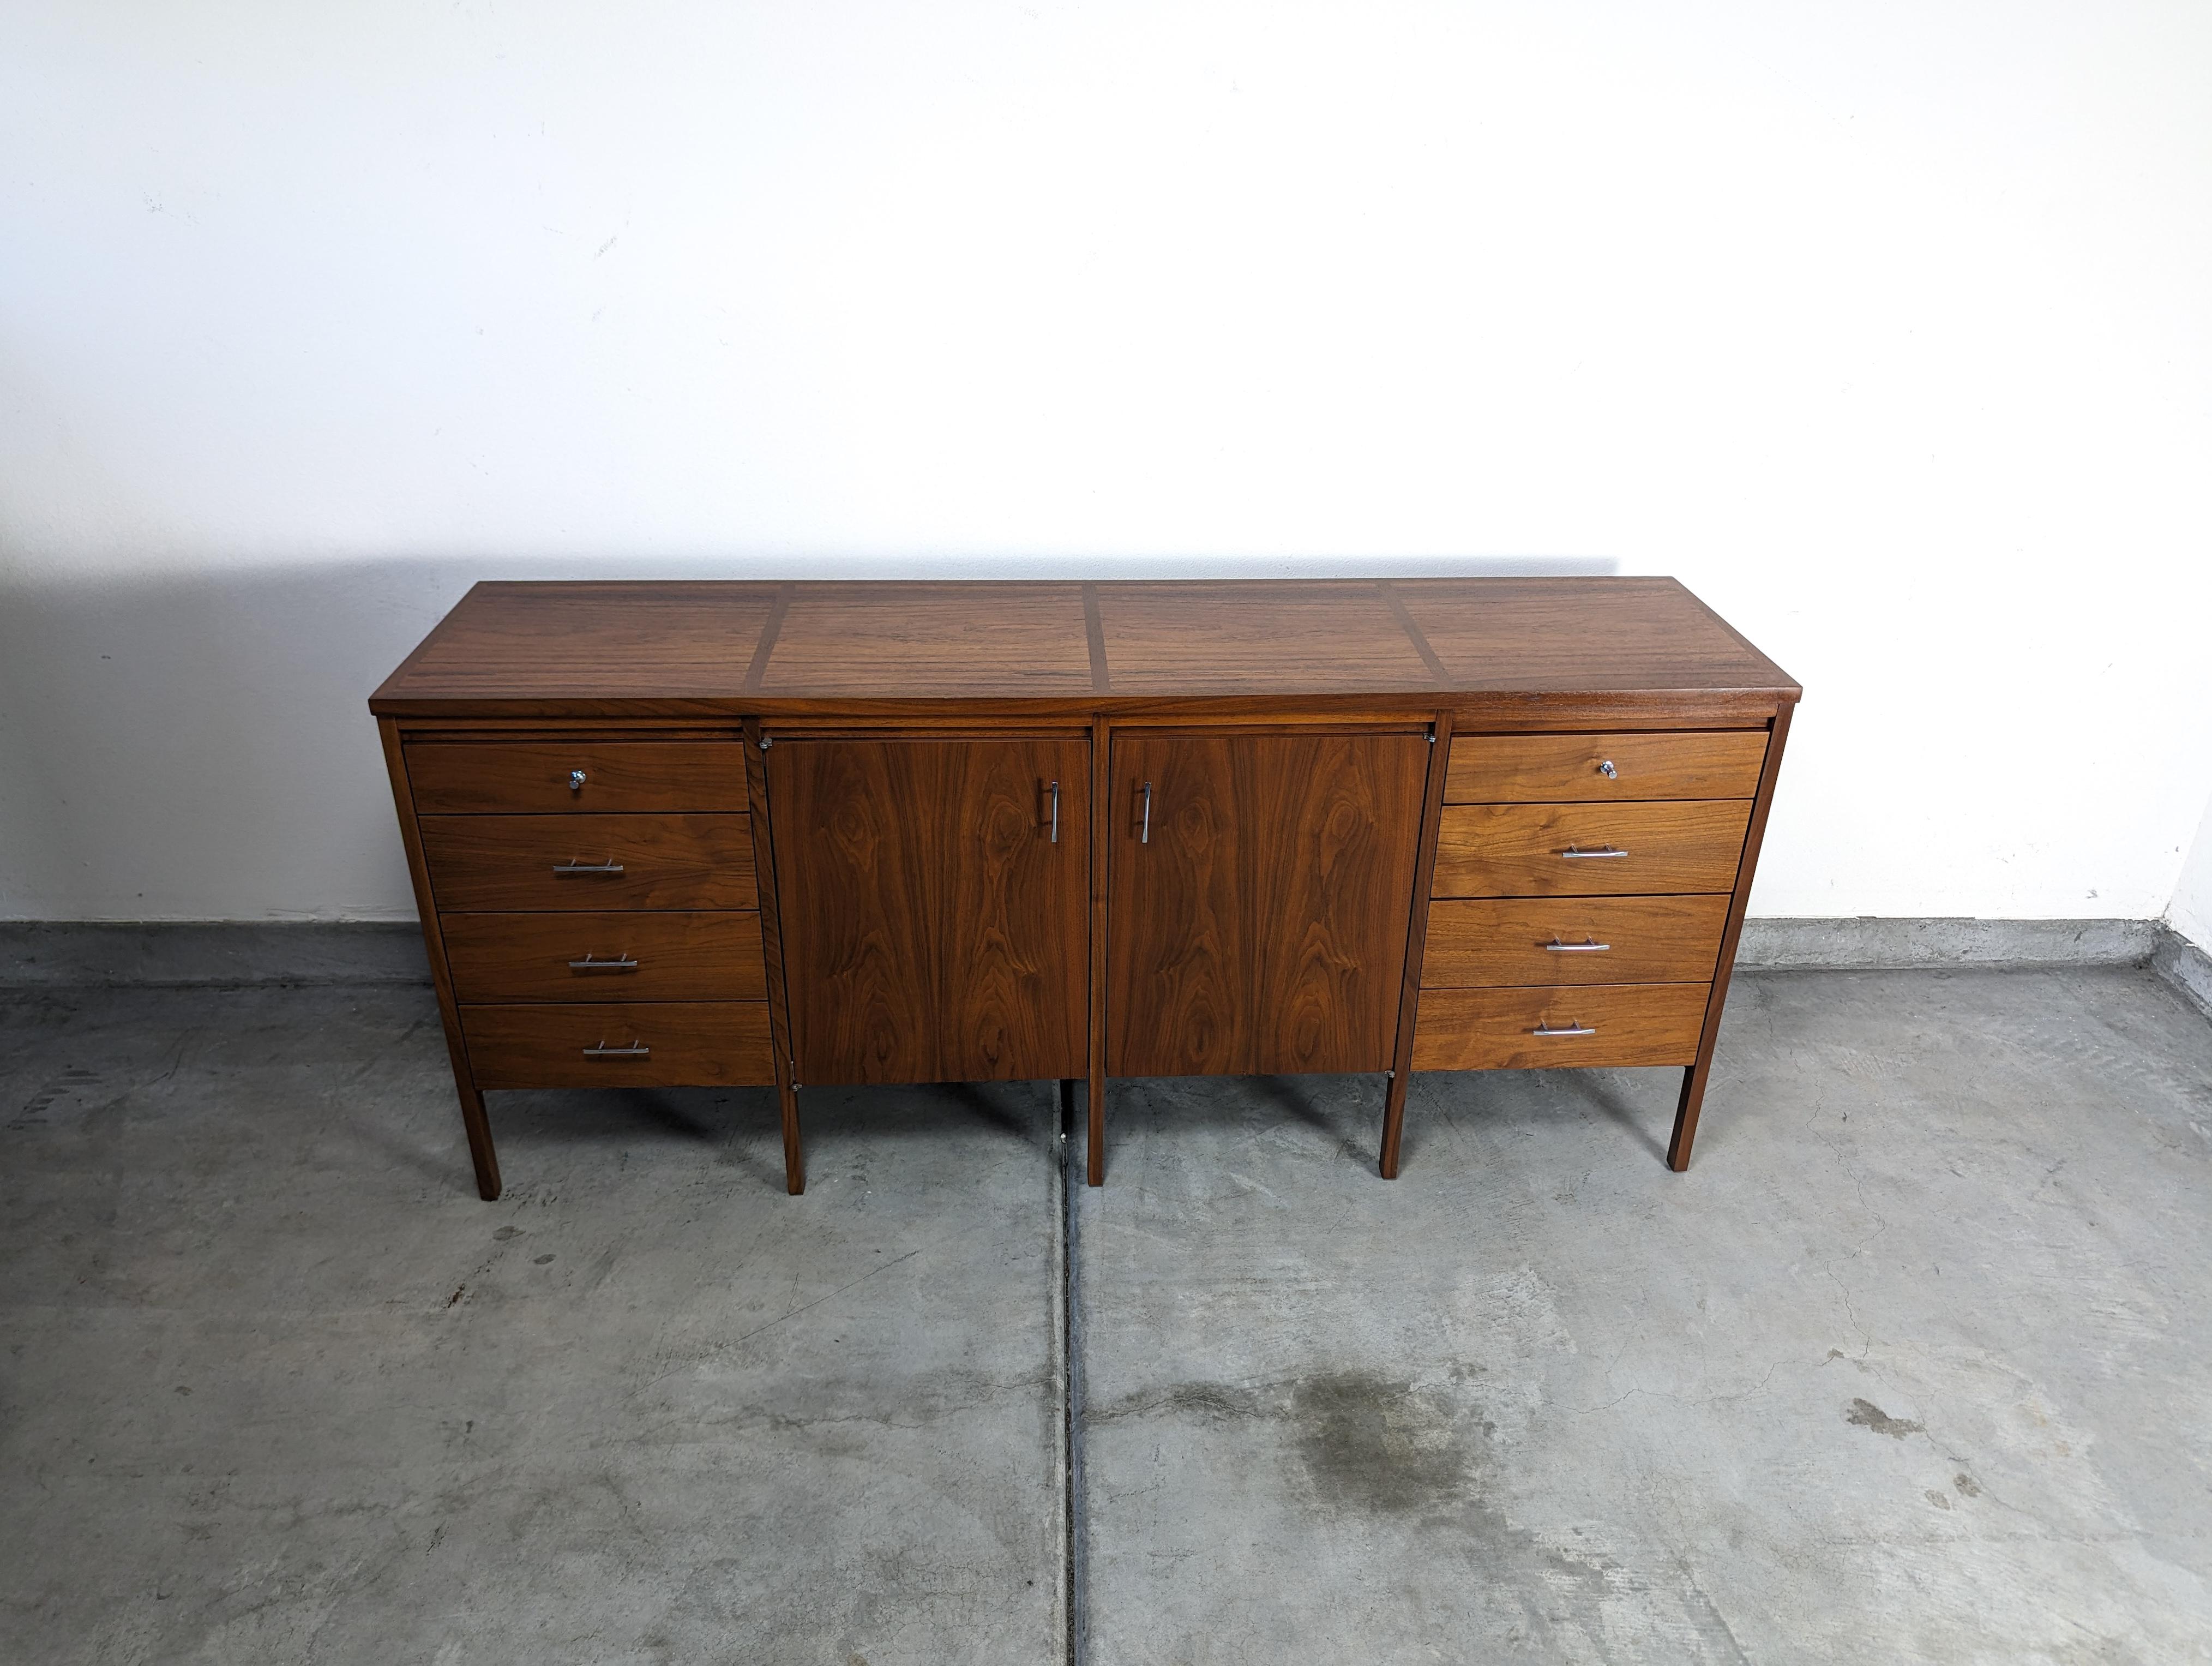 Prepare to fall in love with a piece of history. This stunning and rare mid-century modern dresser is a part of the 